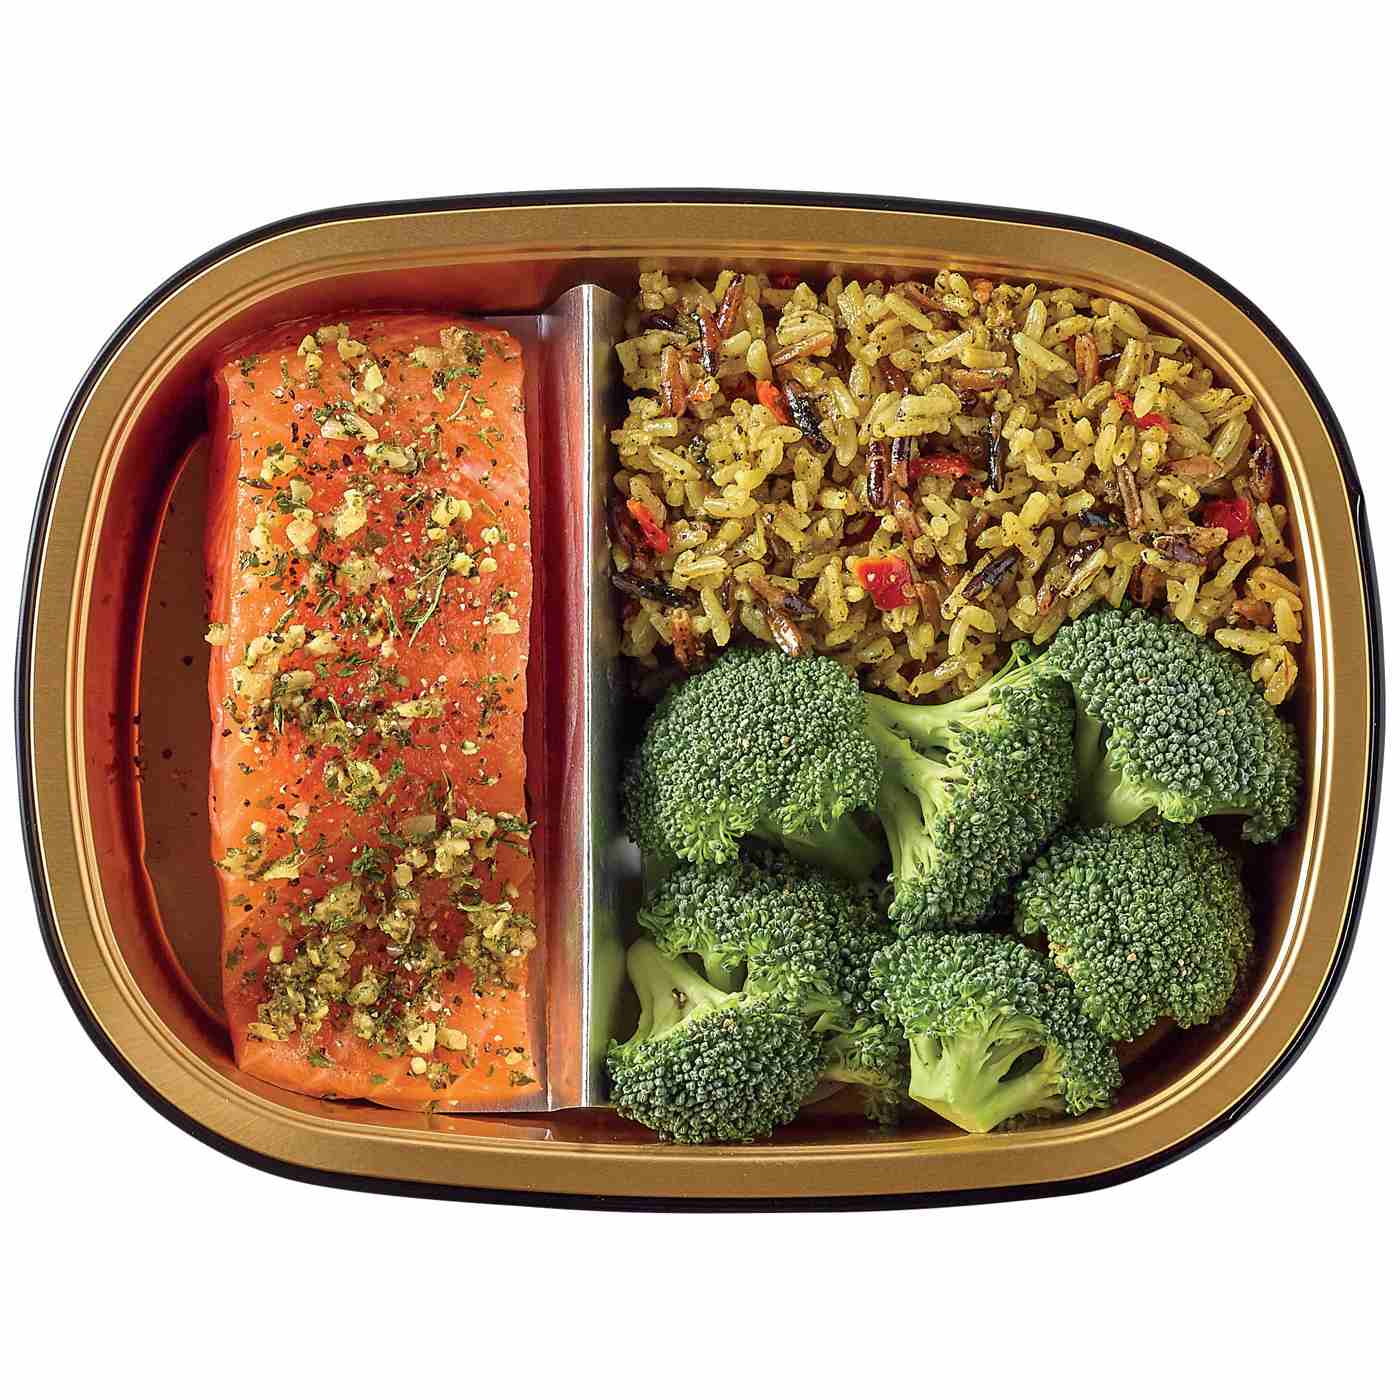 Meal Simple by H-E-B Lemon Pepper Salmon, Wild Rice & Broccoli; image 4 of 4